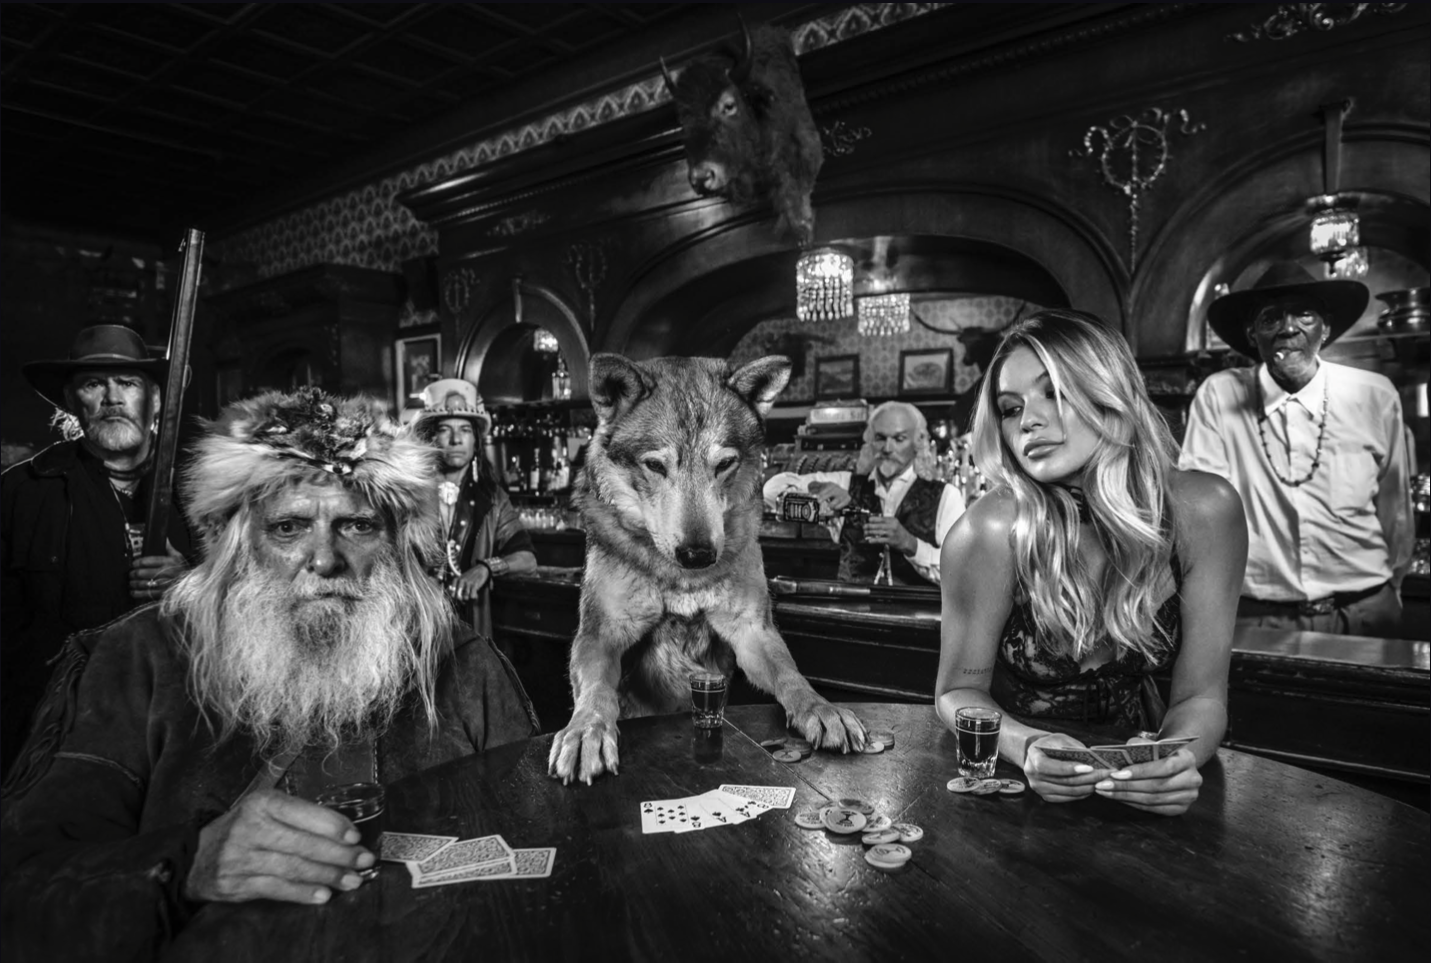 Aces and Eights-Photographic Print-David Yarrow-Sorrel Sky Gallery